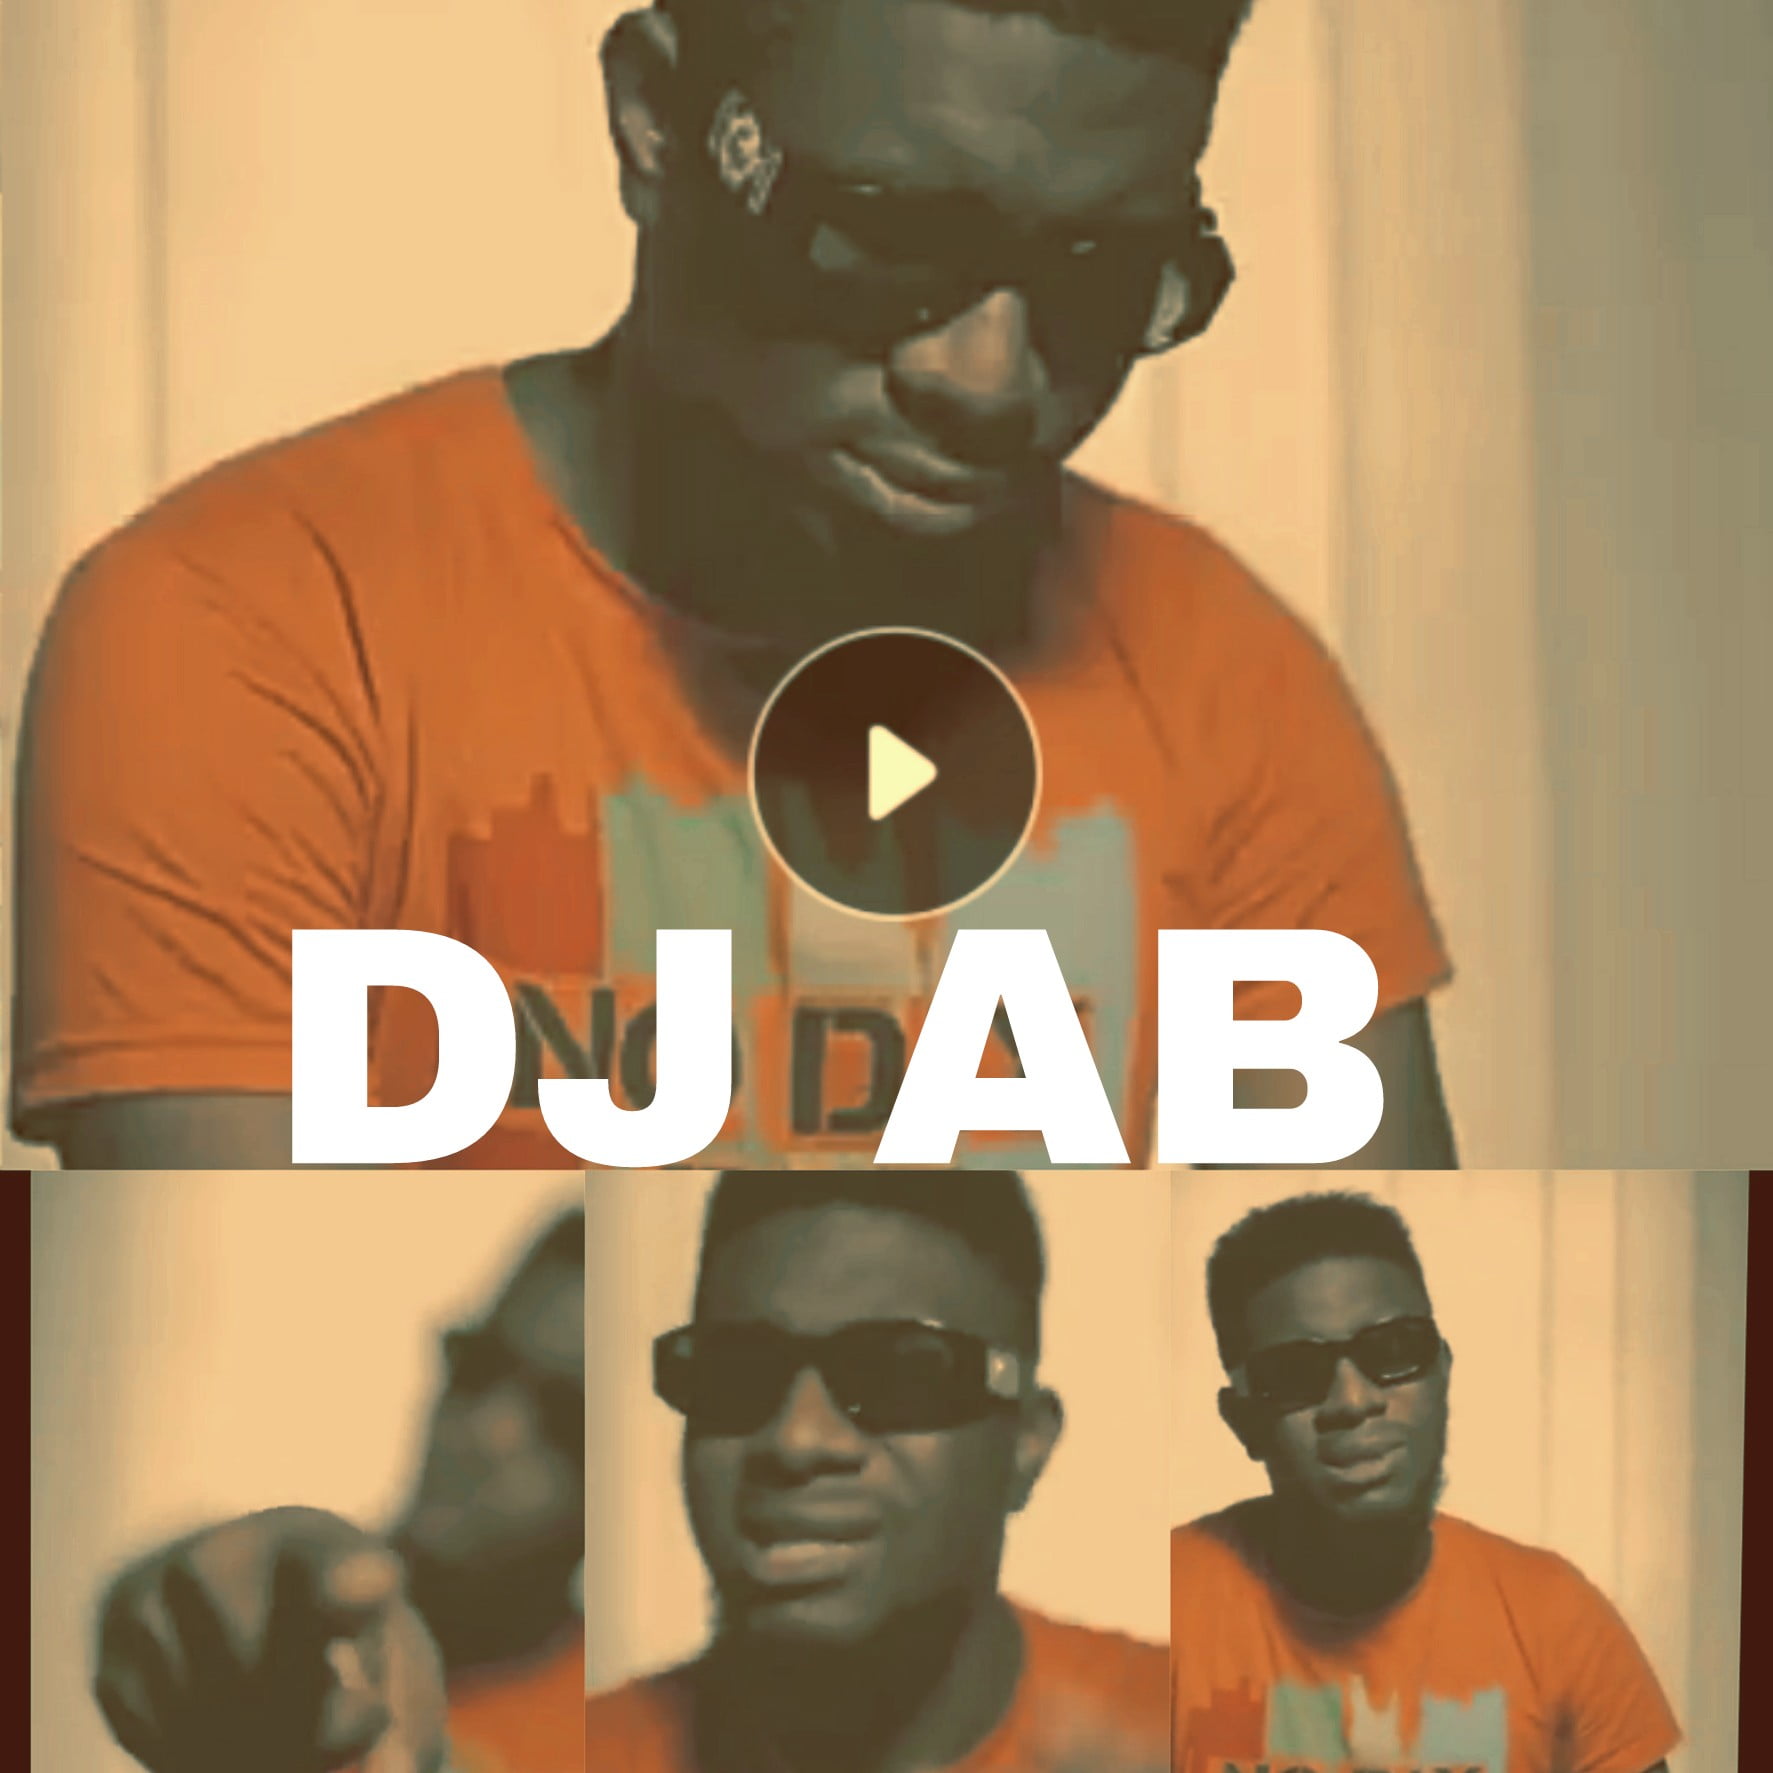 VIDEO: Dj AB mercilessly killed new beat with a hot Rap style – The path that I chose is you